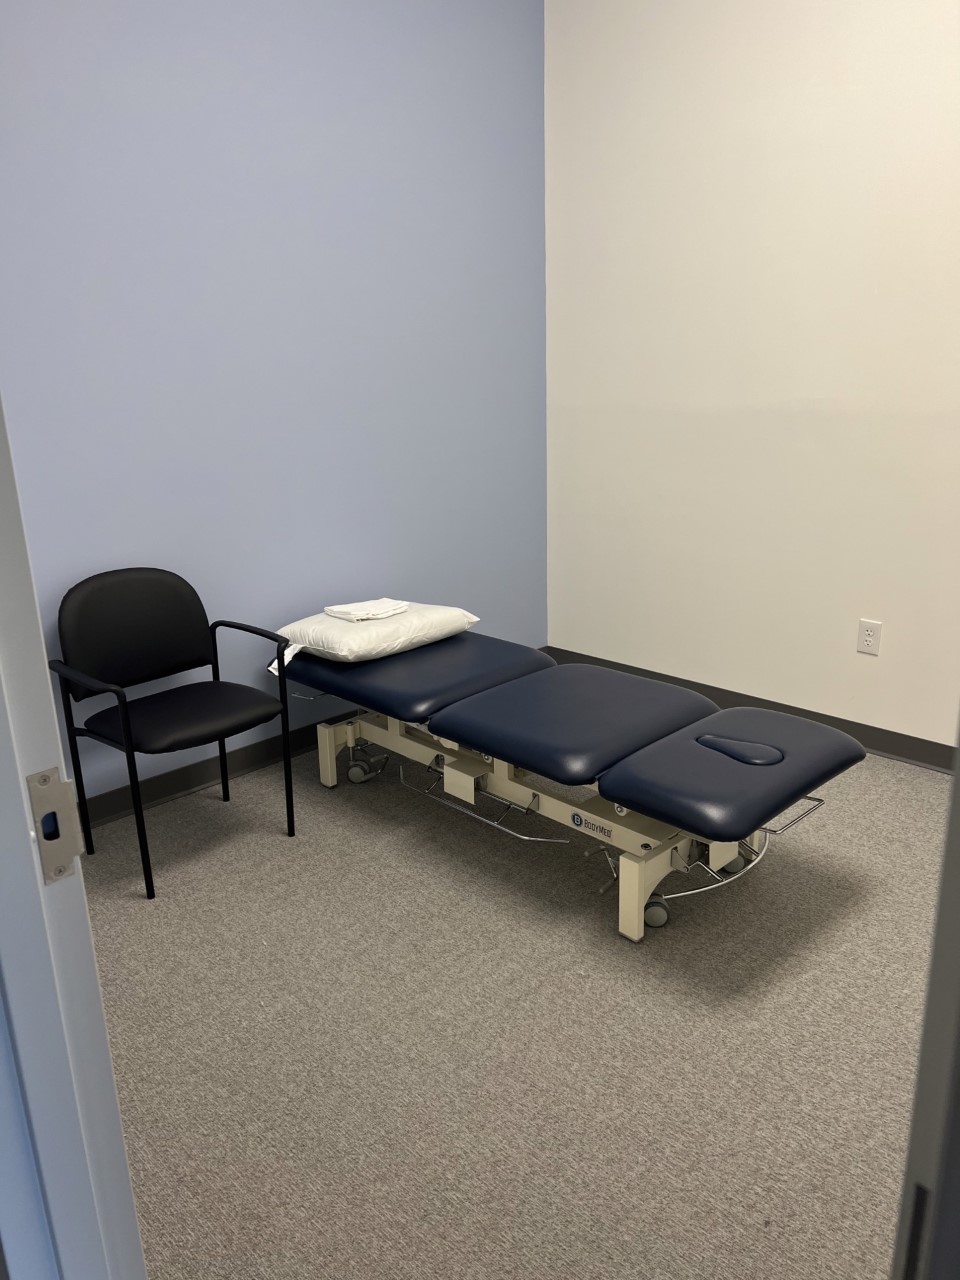 Image 6 | Bay State Physical Therapy